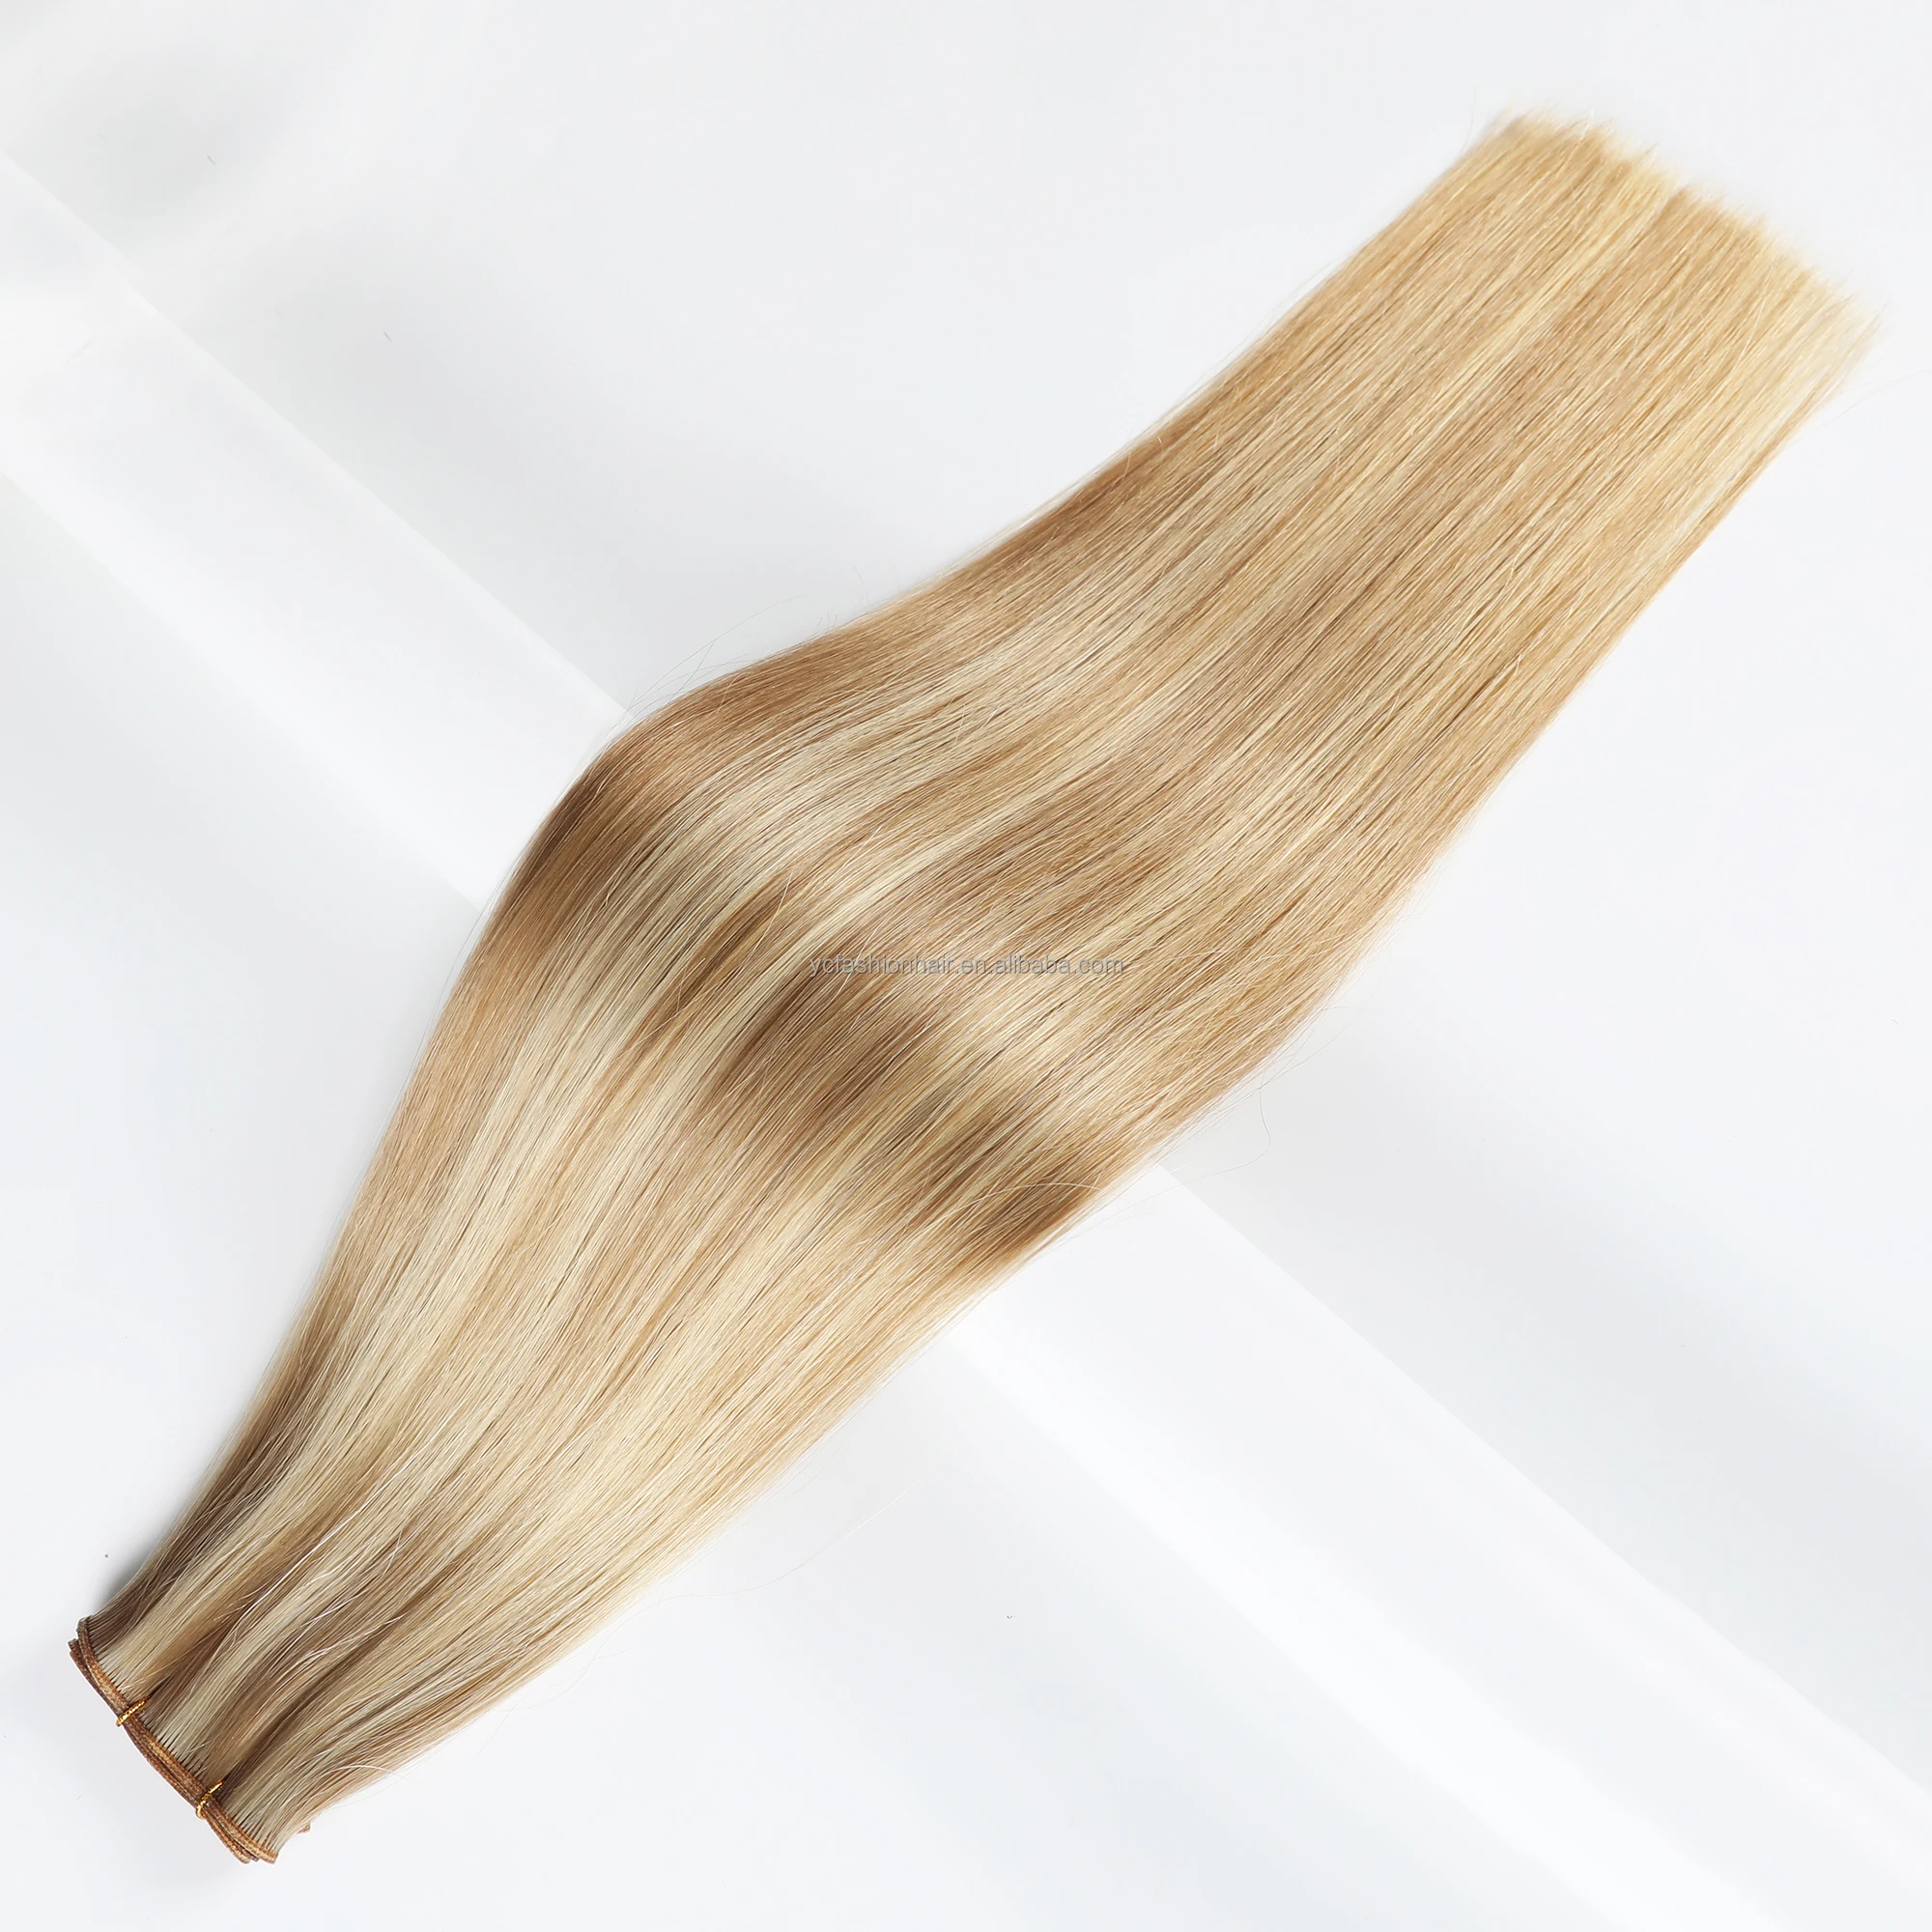 Yongchuan Rts P18-613 Genius Wefts Top Quality 100g Russian Seamless ...